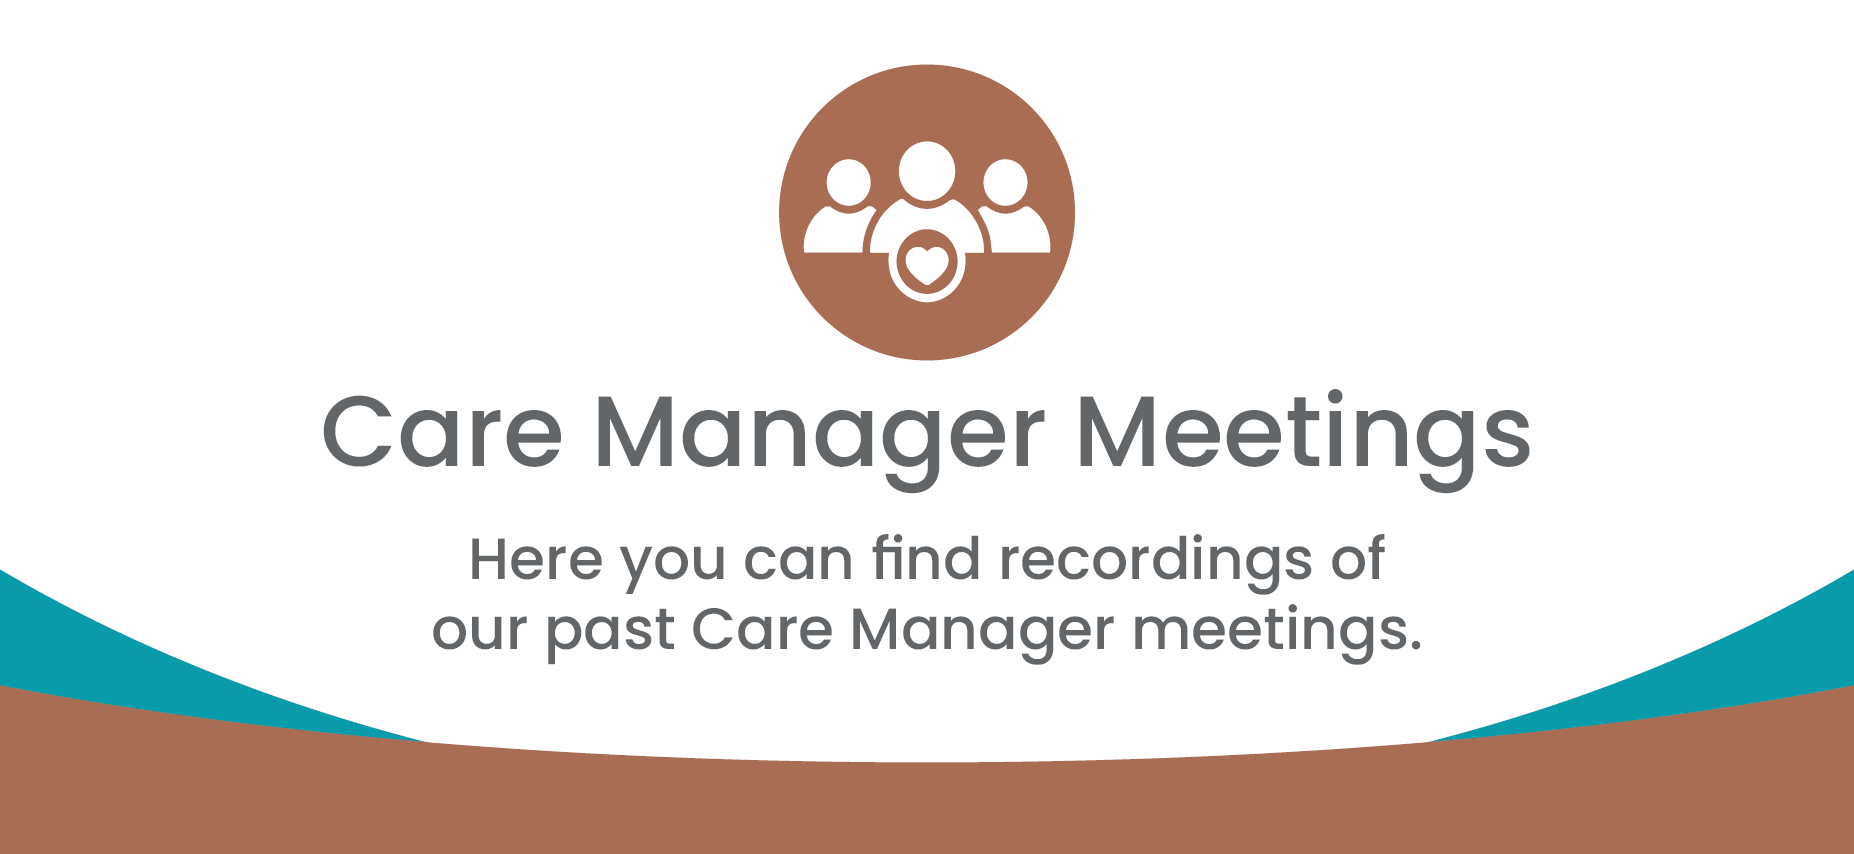 Care Manager Meetings